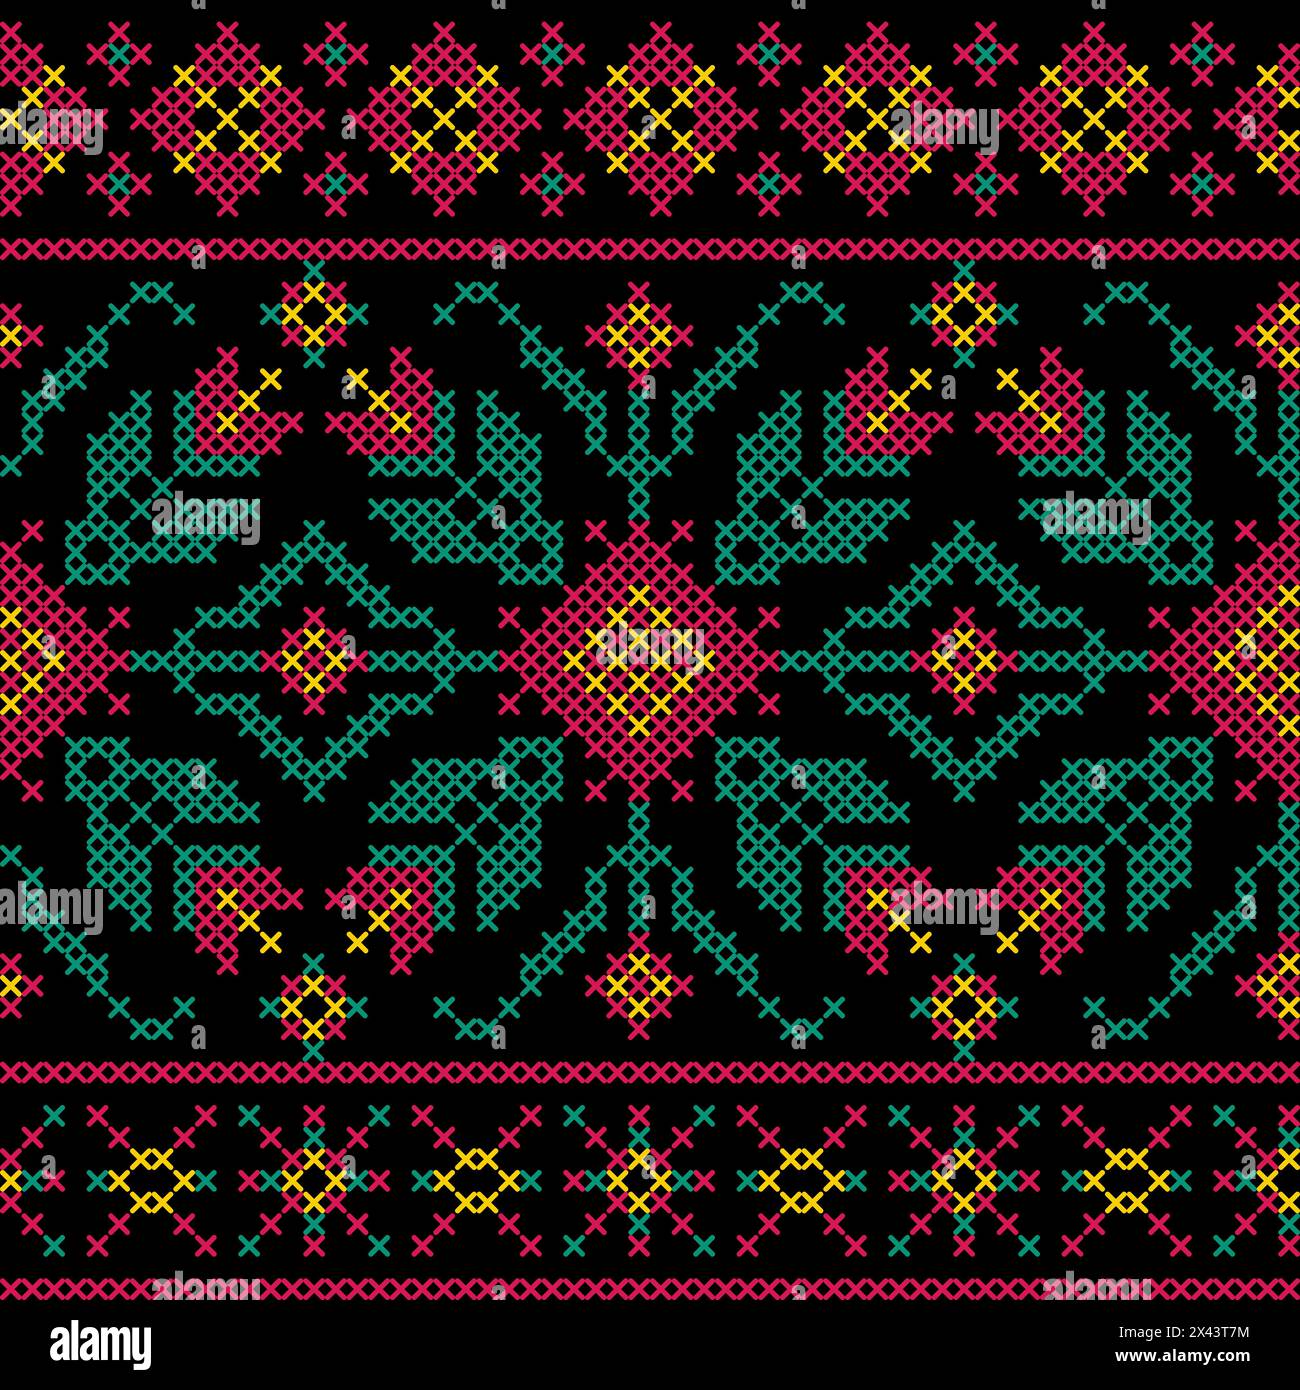 Seamless pattern in embroidery cross stitch style on black background. Stock Vector